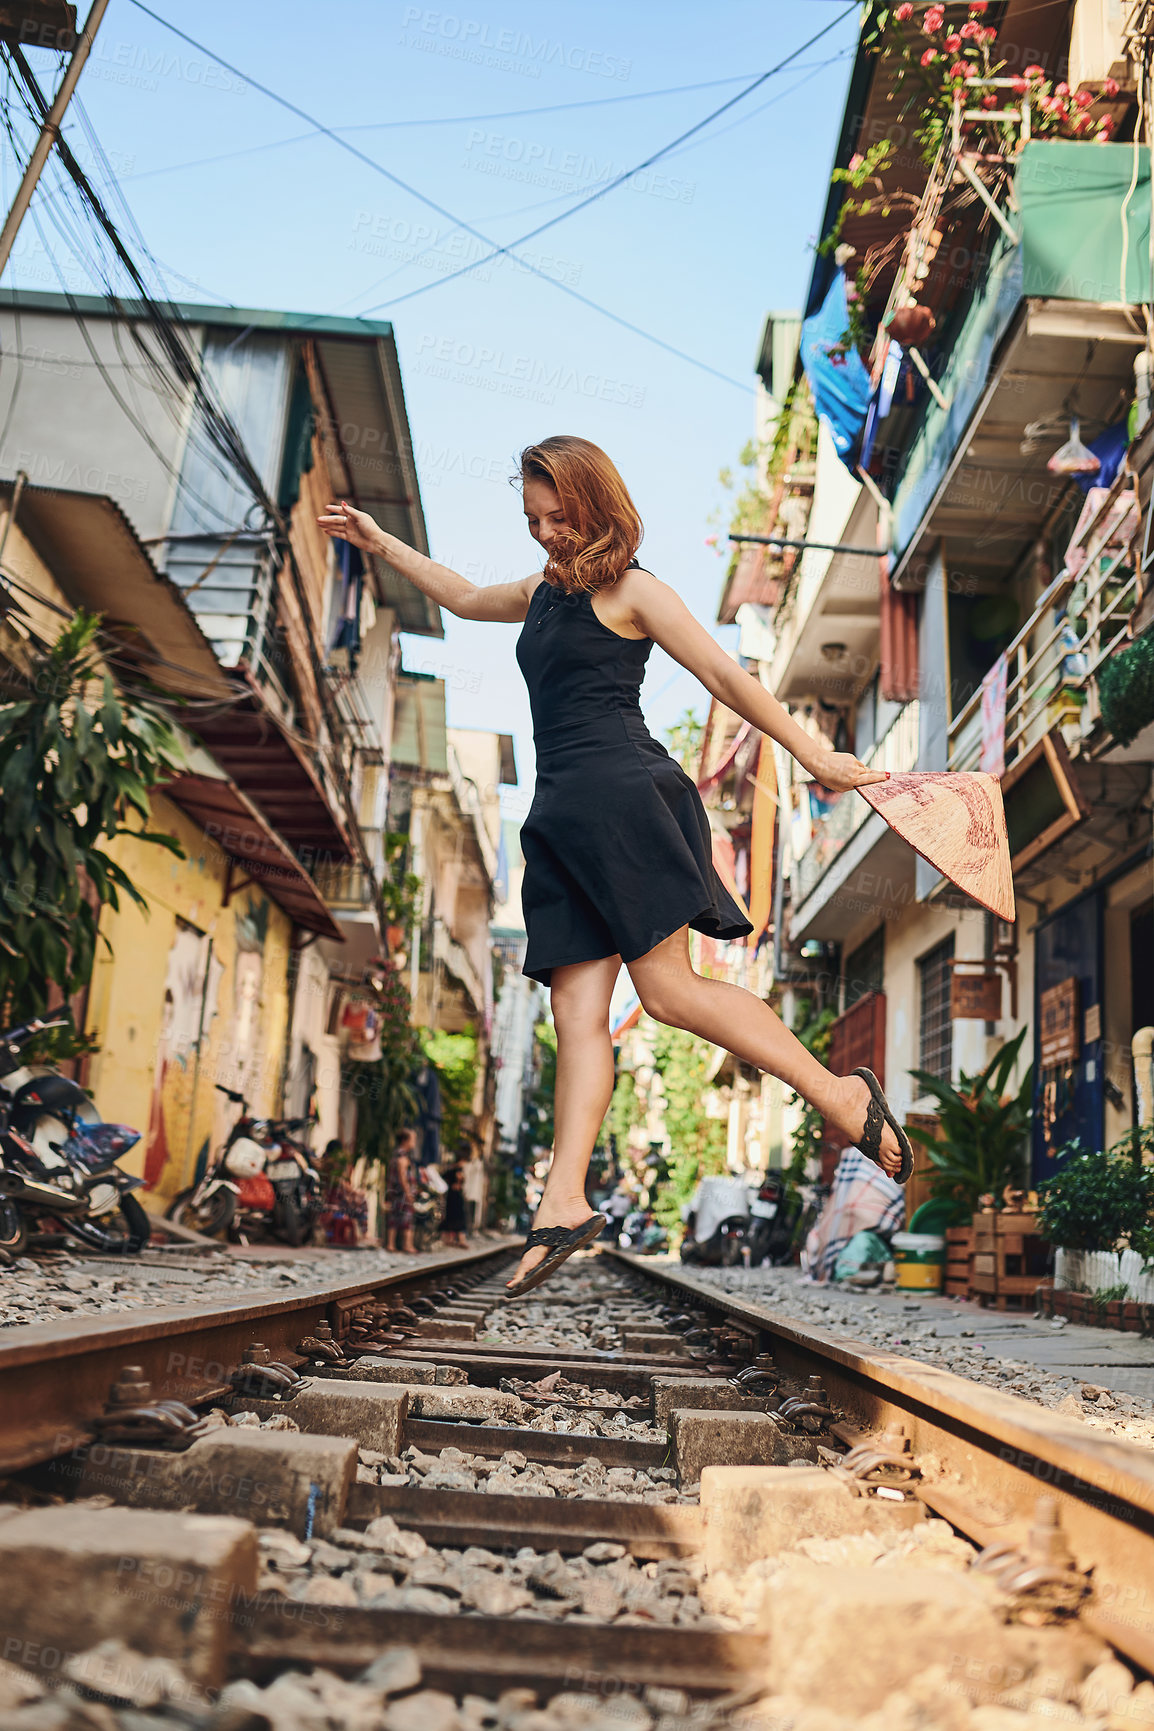 Buy stock photo Shot of a woman out on the train tracks in the streets of Vietnam